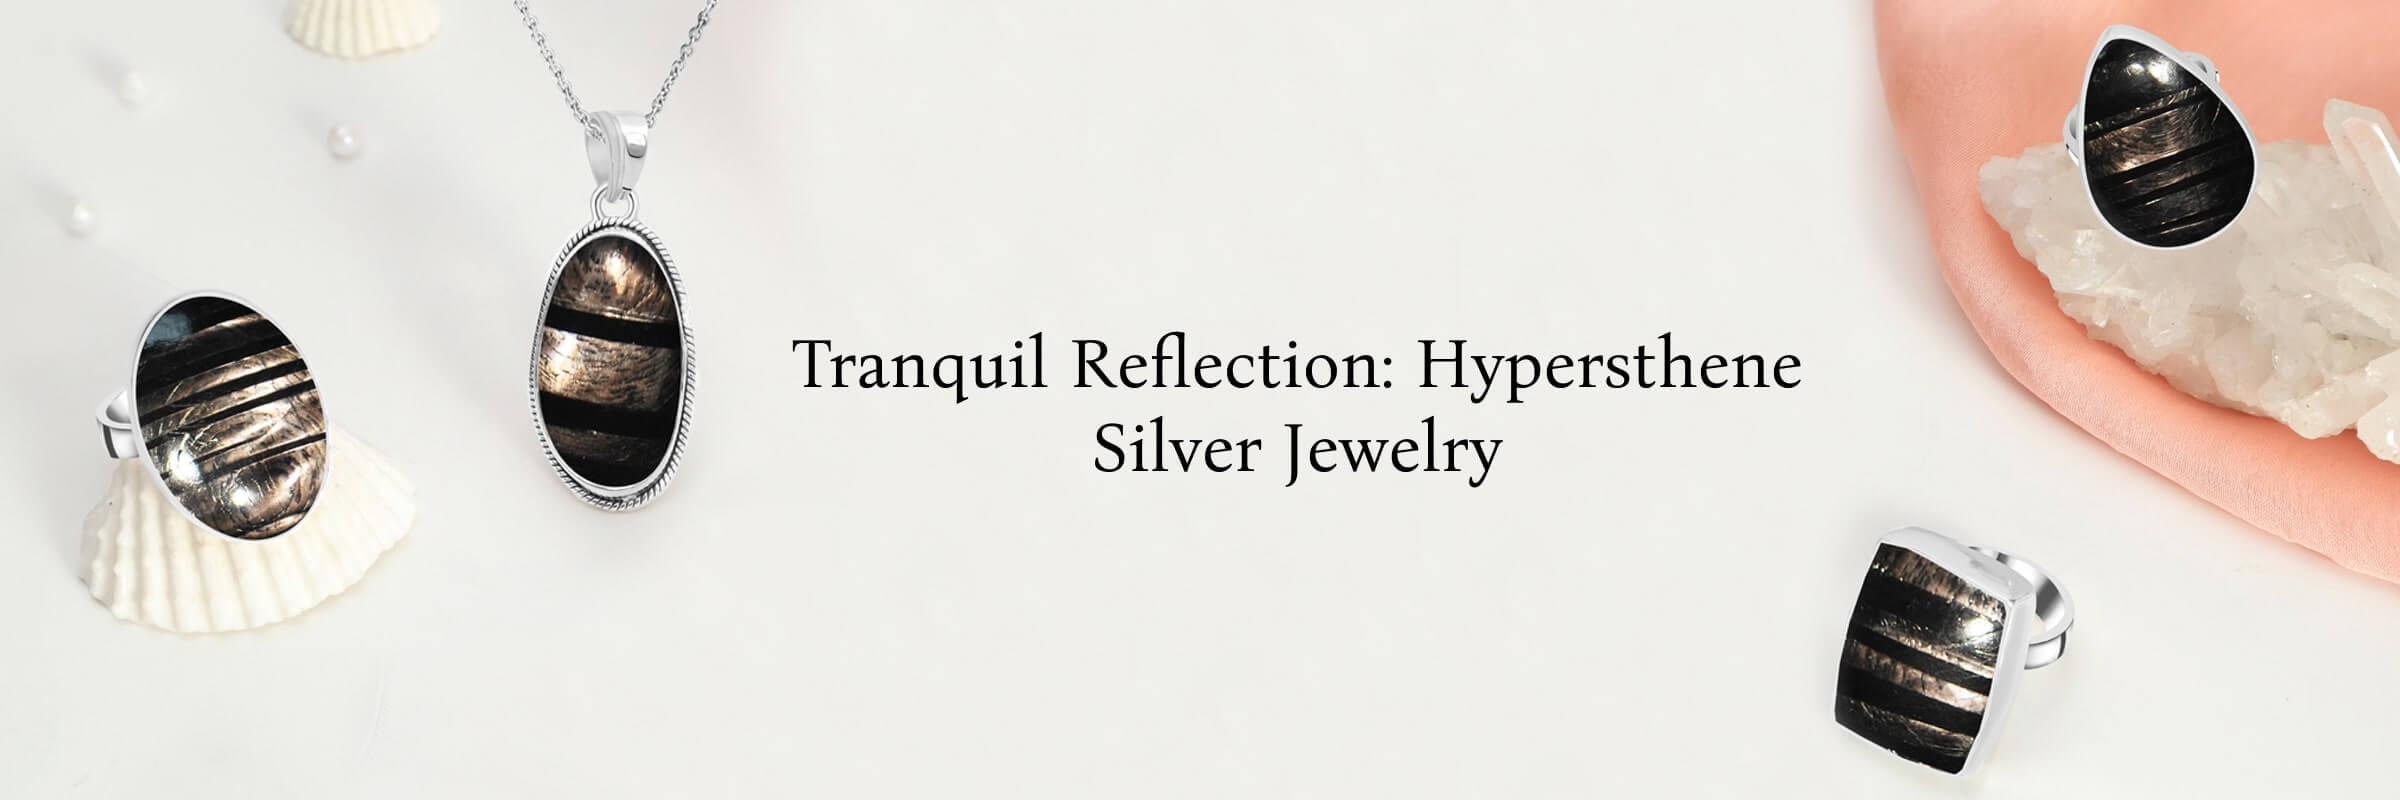 Meditation with Hypersthene Plain Silver Jewelry